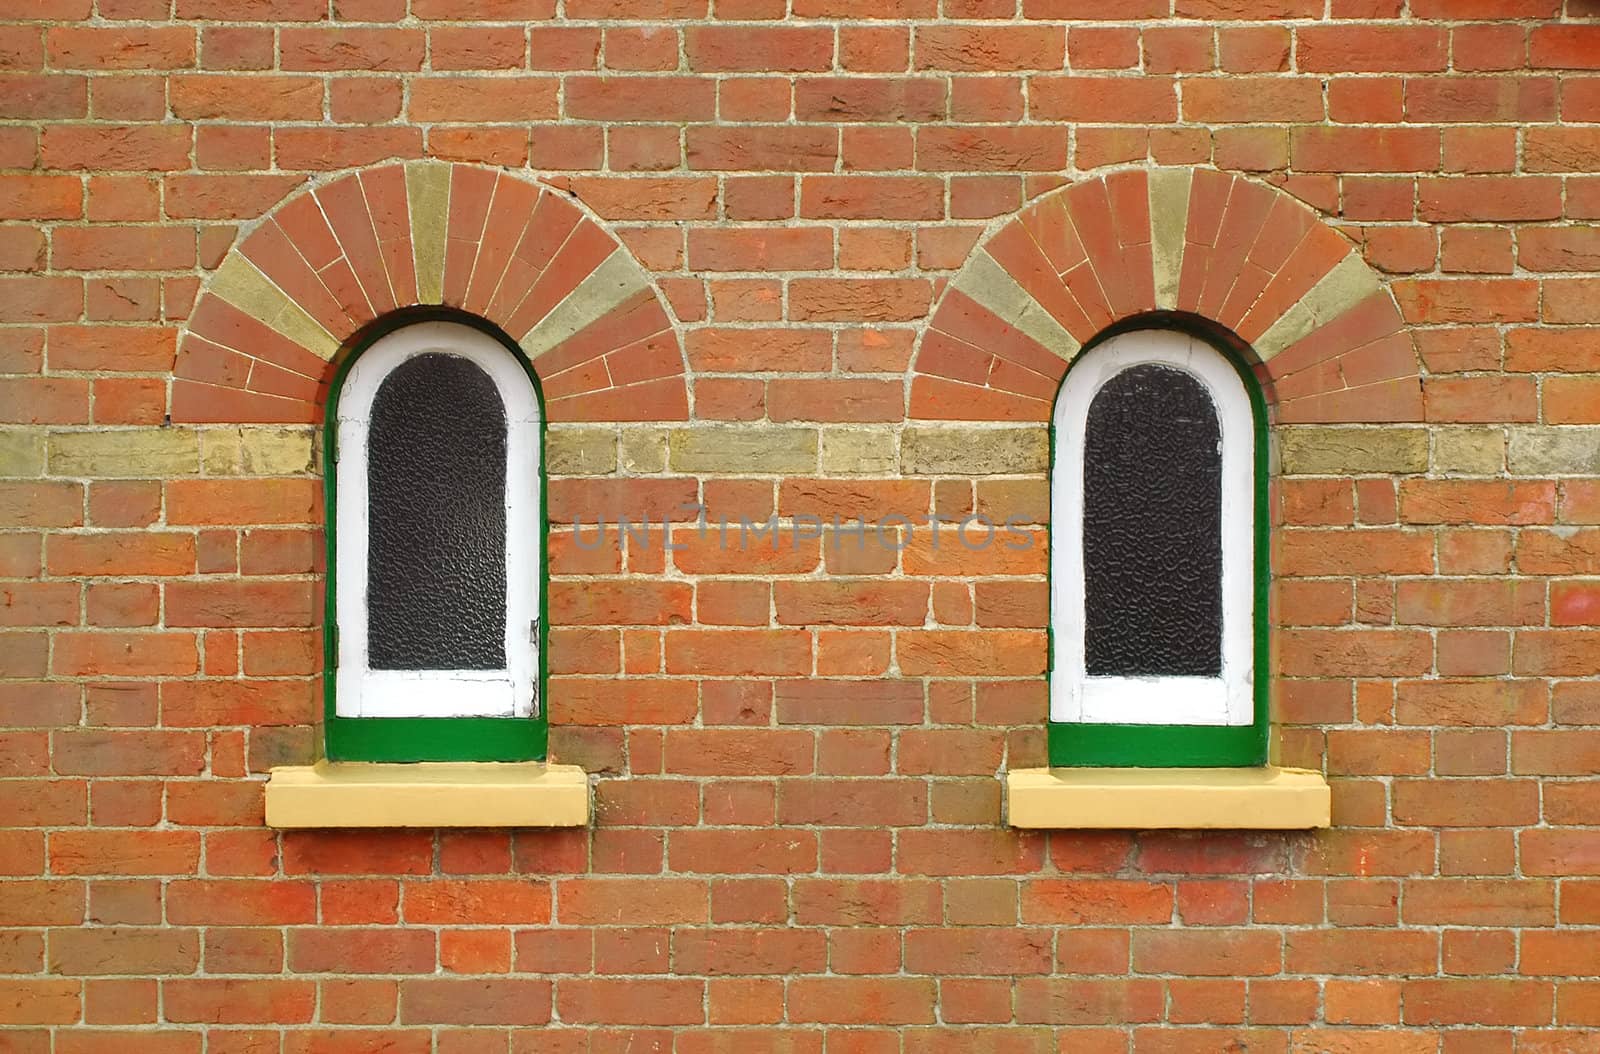 architectural background of bricks and arched windows